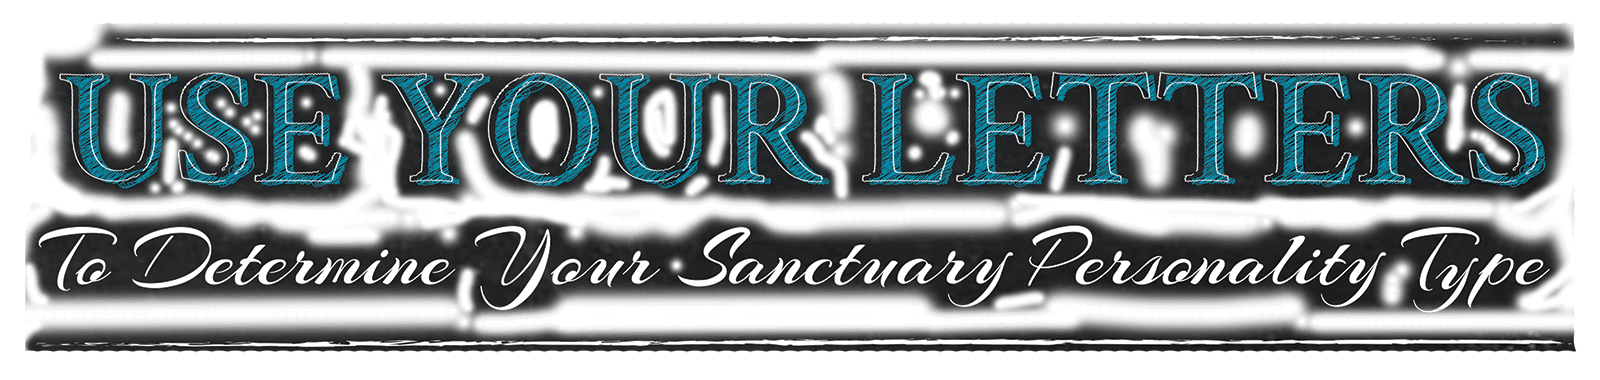 use your letter to determine your sanctuary personality type